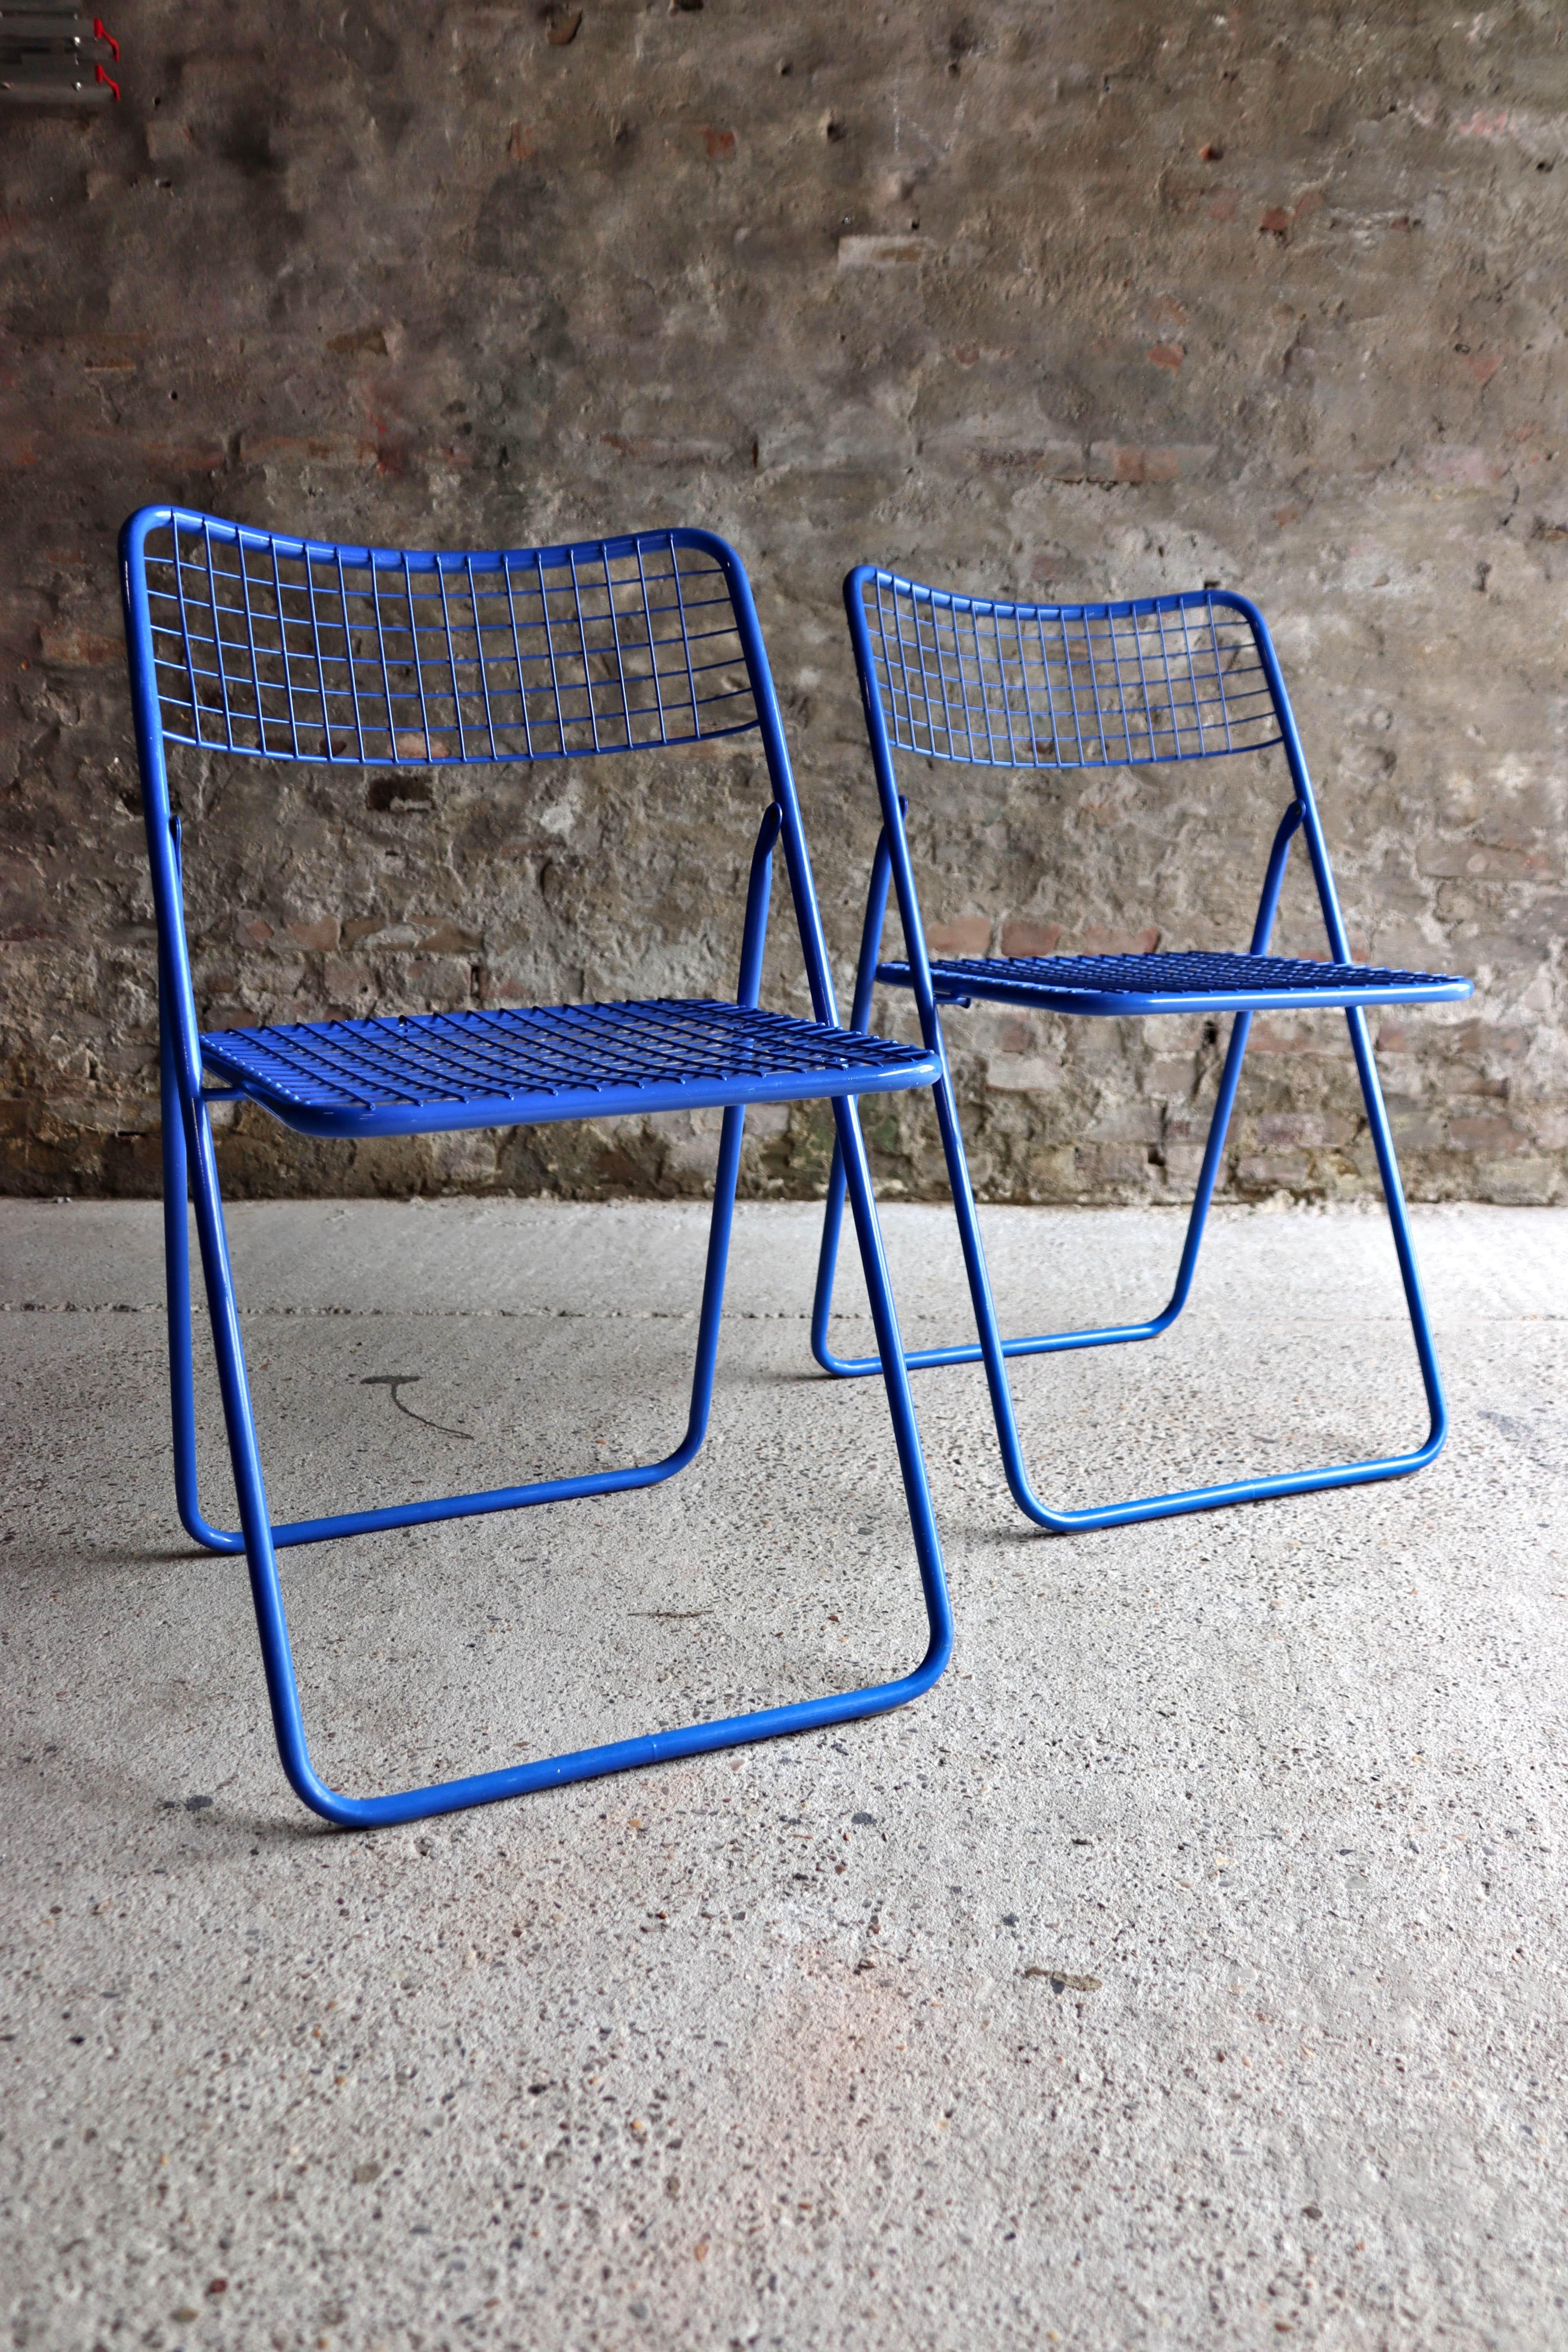 This really cool chair is called Rappen / Ted Net and is designed by Niels Gammelgaard for IKEA in the 1970s. With a blue lacquered metal seat and backrest and is in good condition. It has little signs of usage. Perfect choice for gardens, terraces